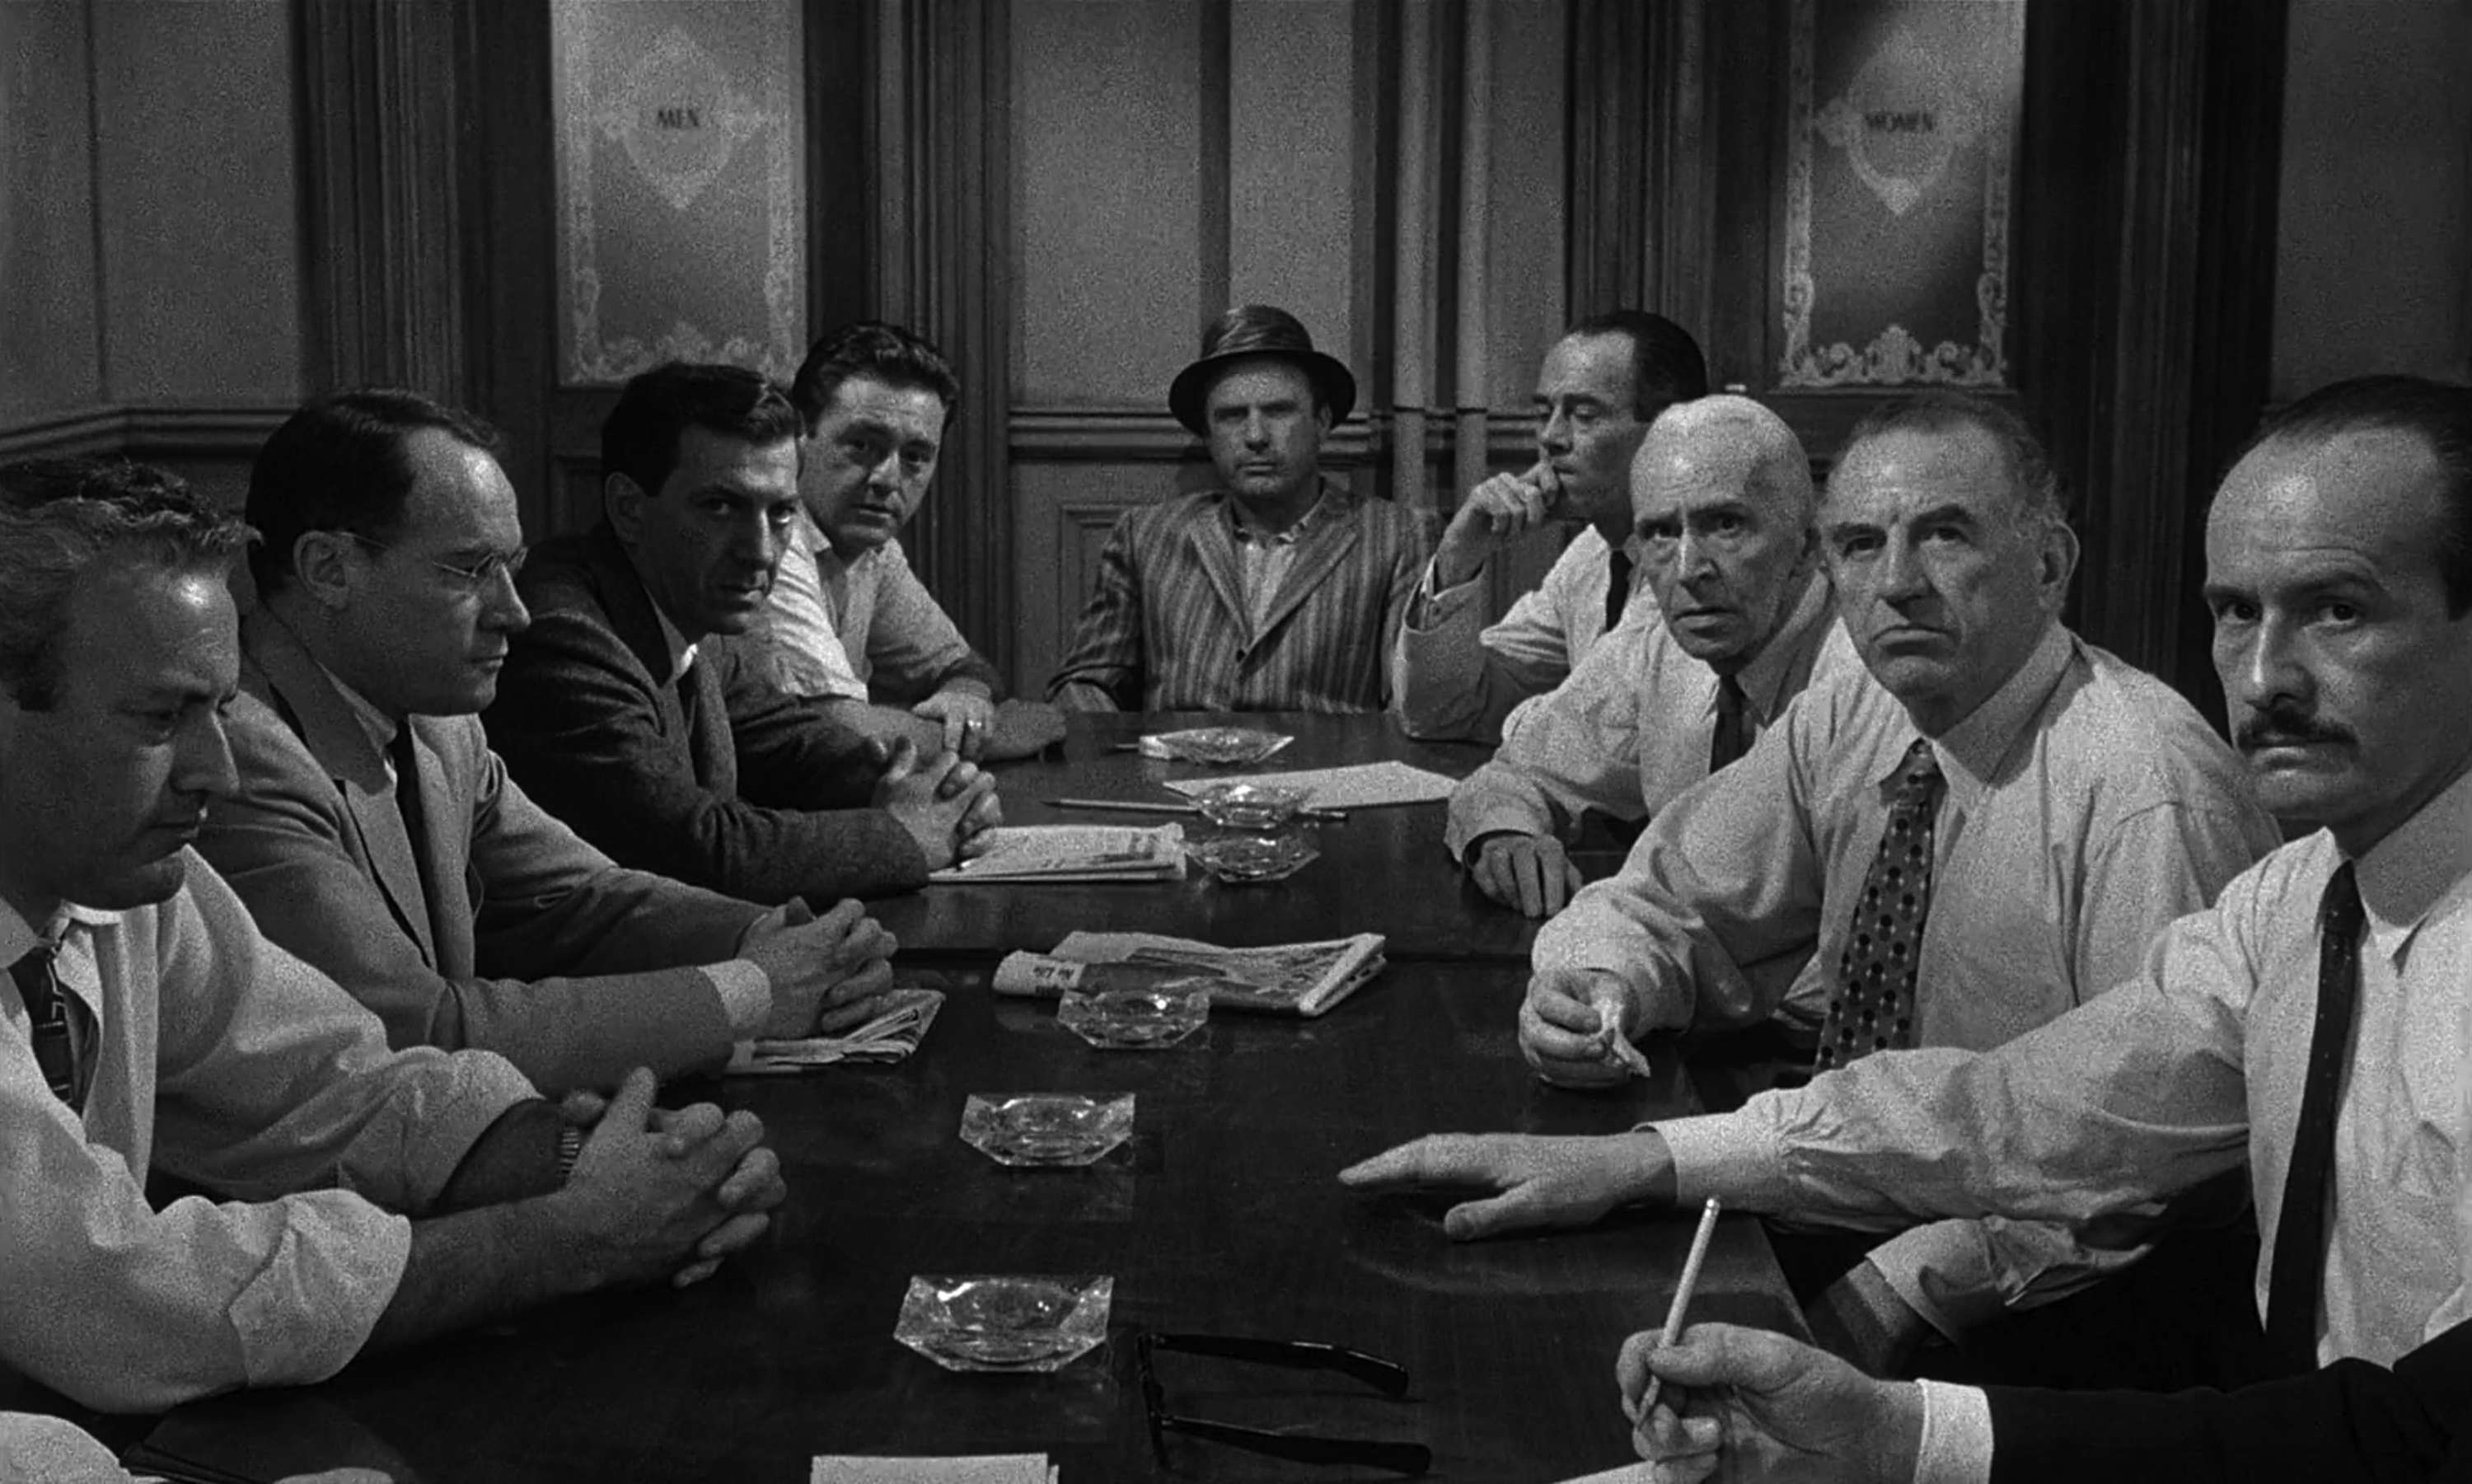 movies ruined with sex scenes - 12 Angry Men